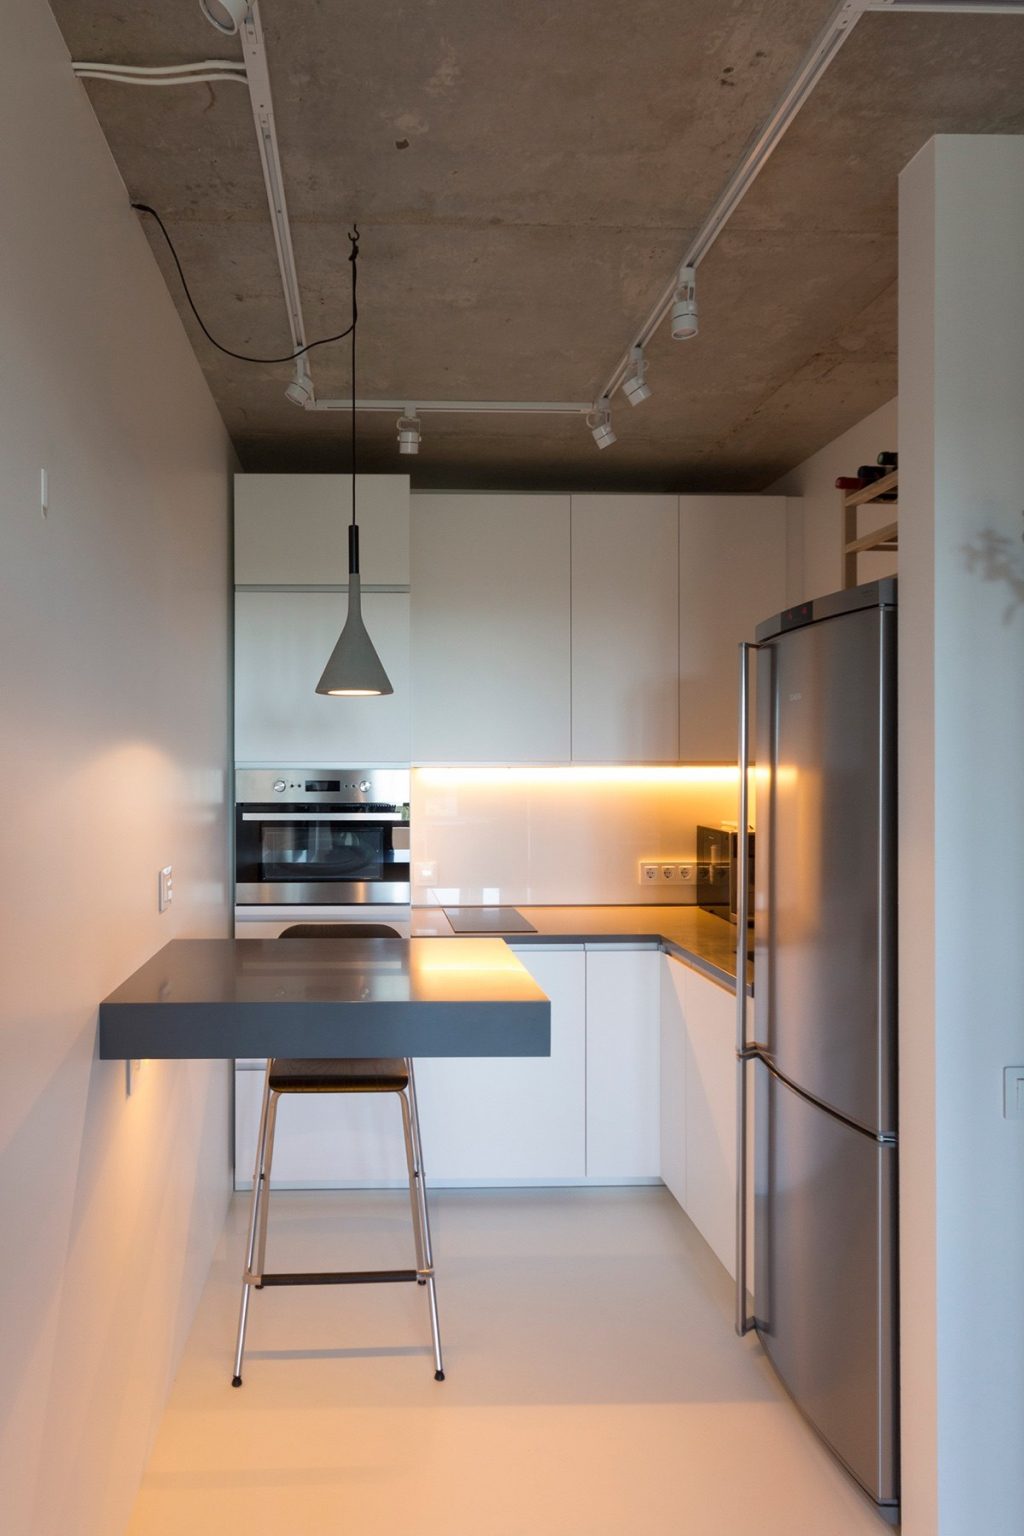 30.Minimalist-kitchen-white-walls-industrial-ceiling-grey-hanging-light-and-ledge-table